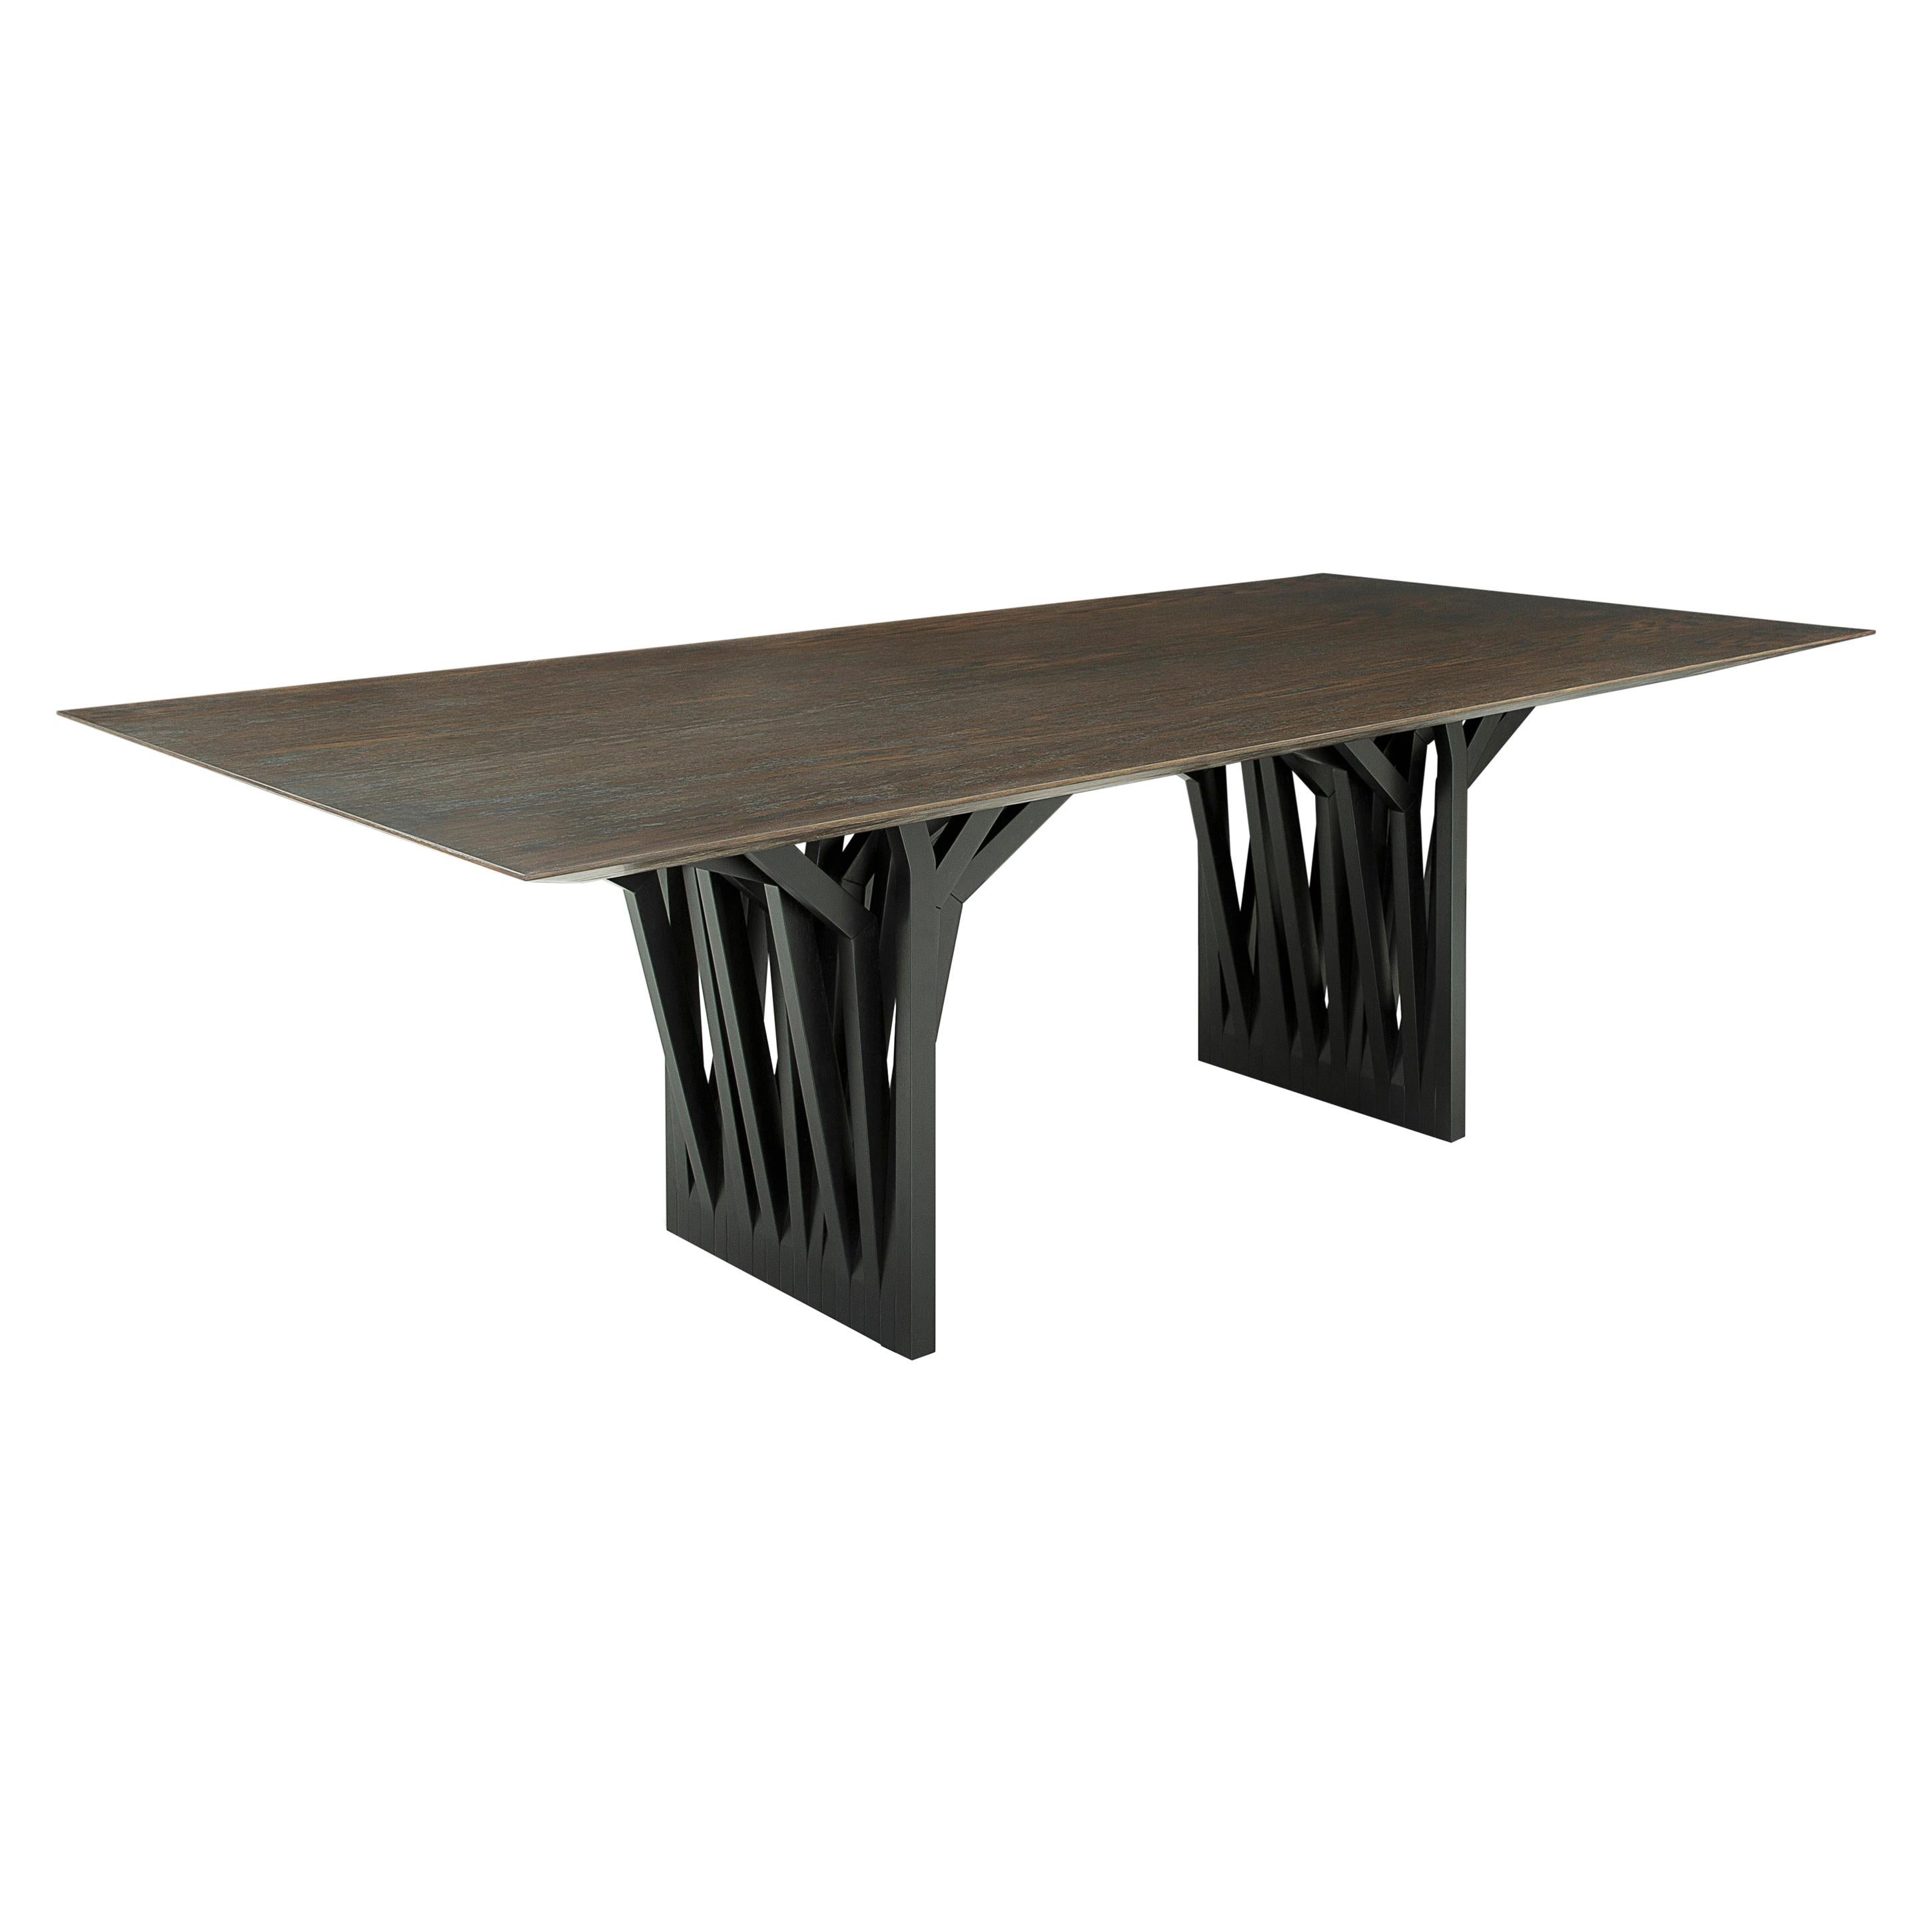 The Radi dining table is this masterpiece in a dark walnut finish wood veneer top and an original black roofing anchor table base, inspired by the aerial roots of trees. This dining table is a very simple piece that the Uultis team has created with